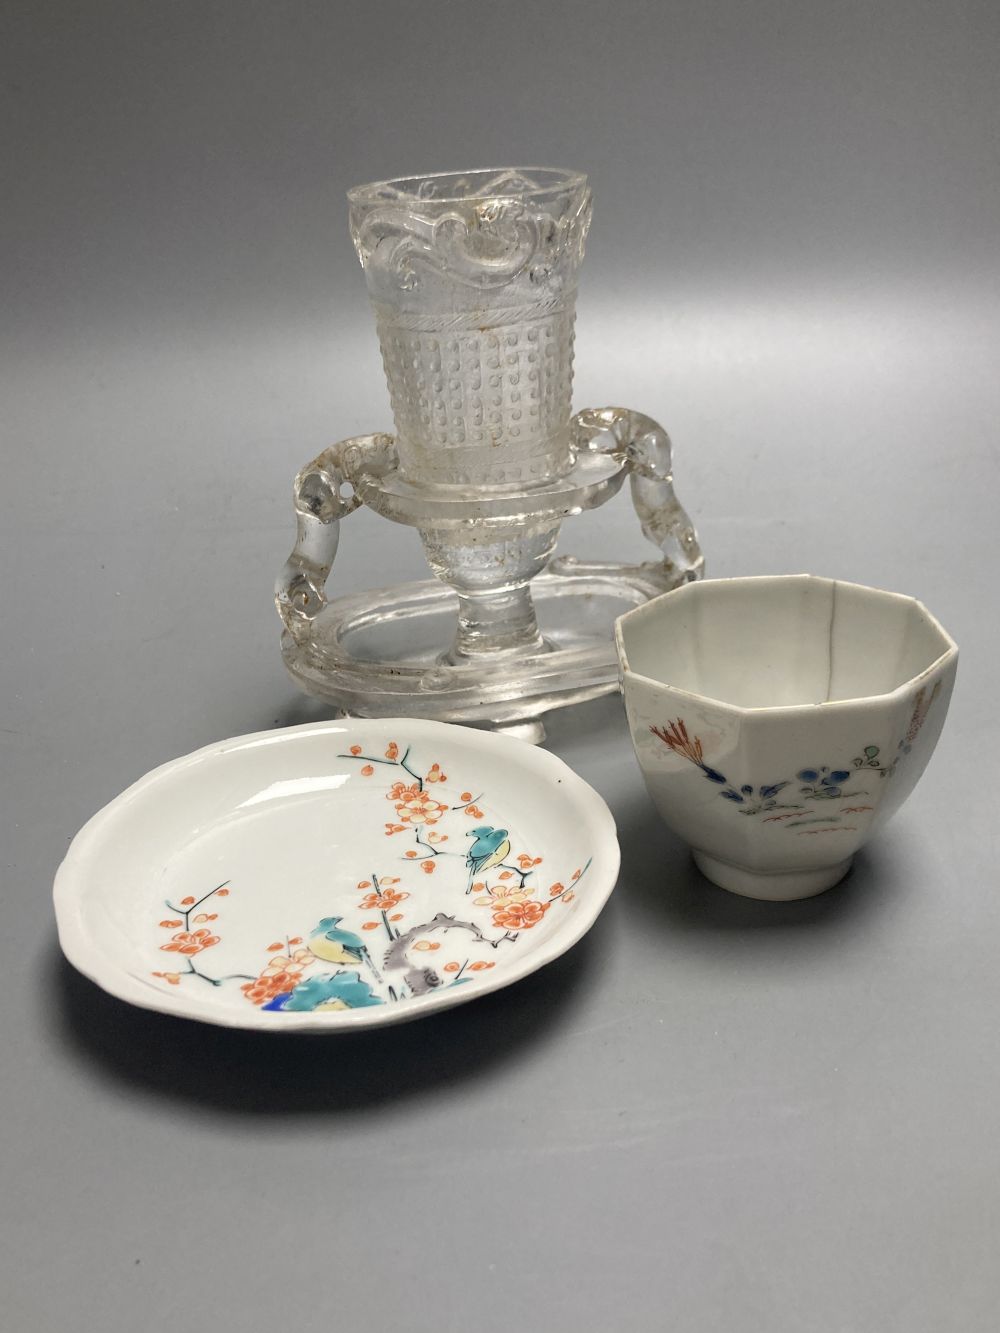 A Japanese Kakiemon dish, 17th century, a similar wine cup, 18th century and a Chinese glass vase and stand, tallest 14cm